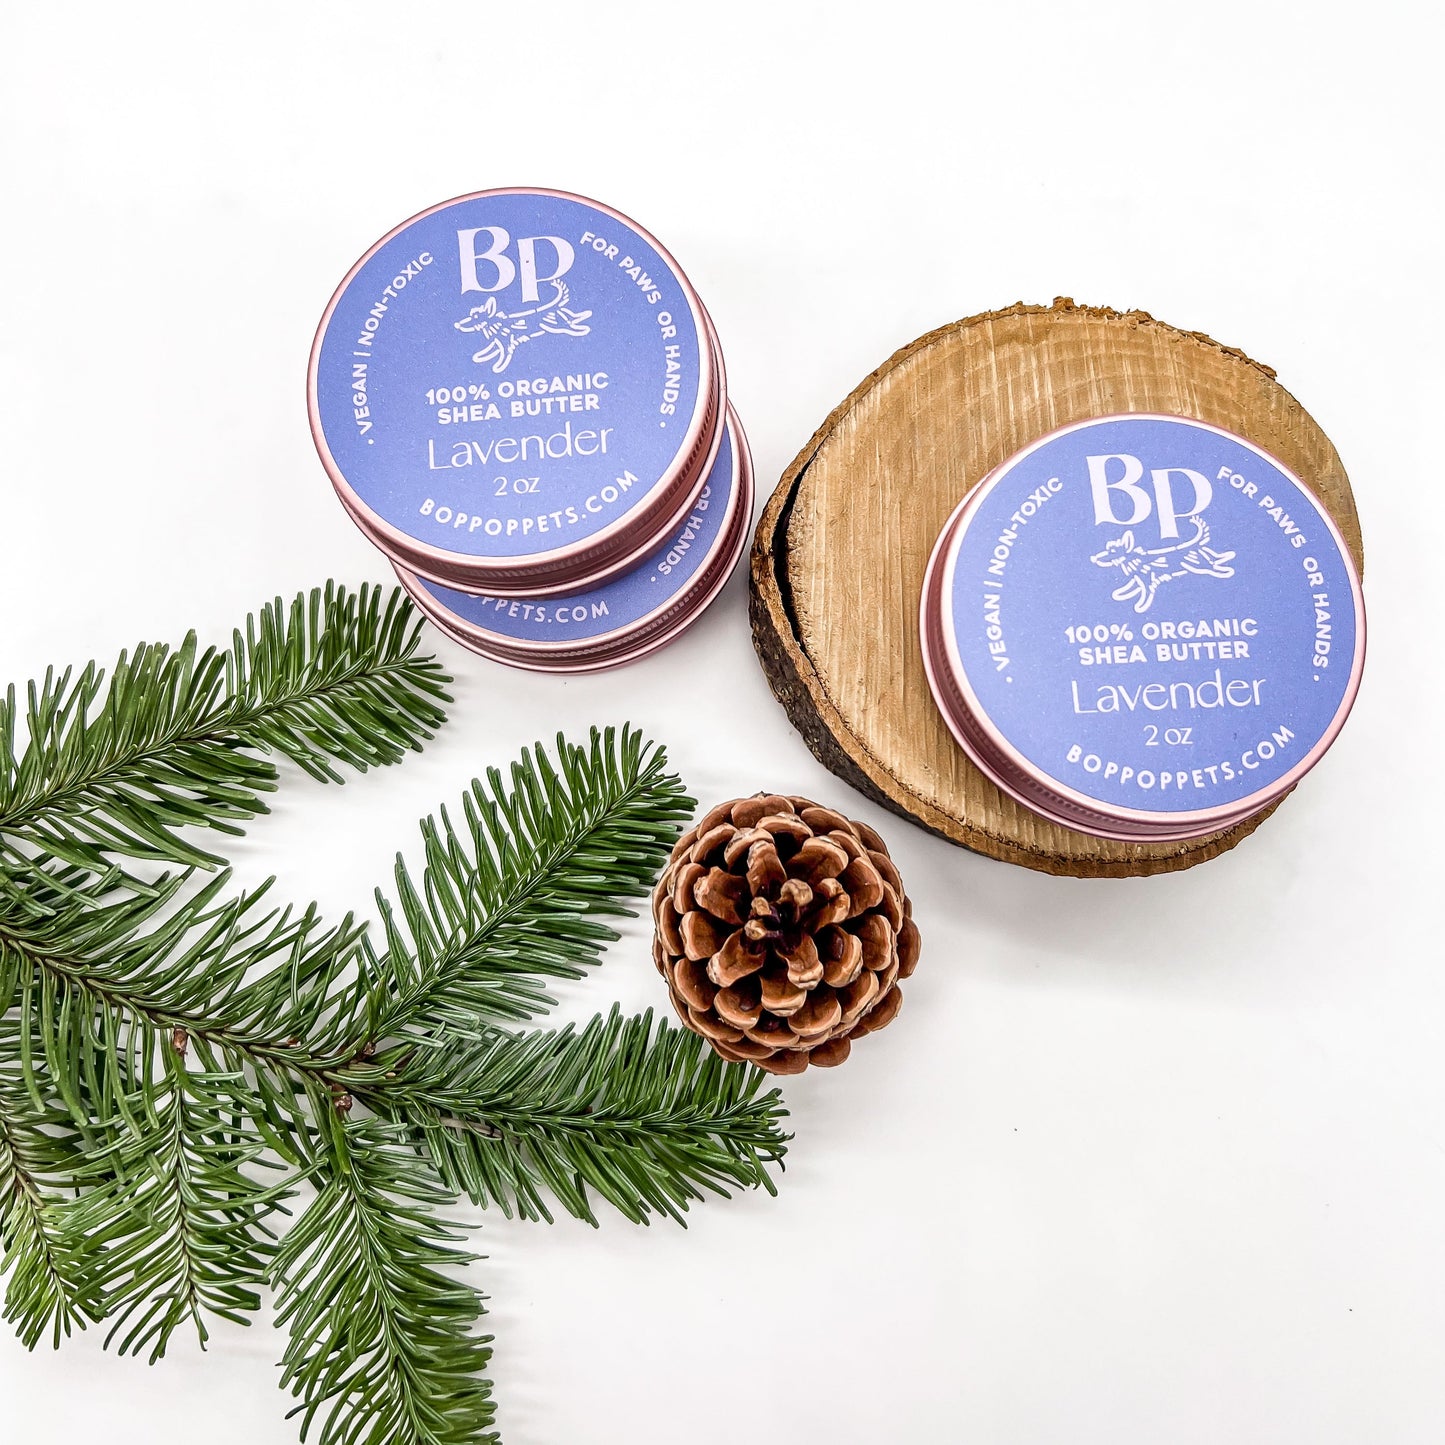 Shea butter lavender paw balm bop pop pets tin for dry cracked dog paws winter hands pet accessories 2 oz non-toxic vegan organic